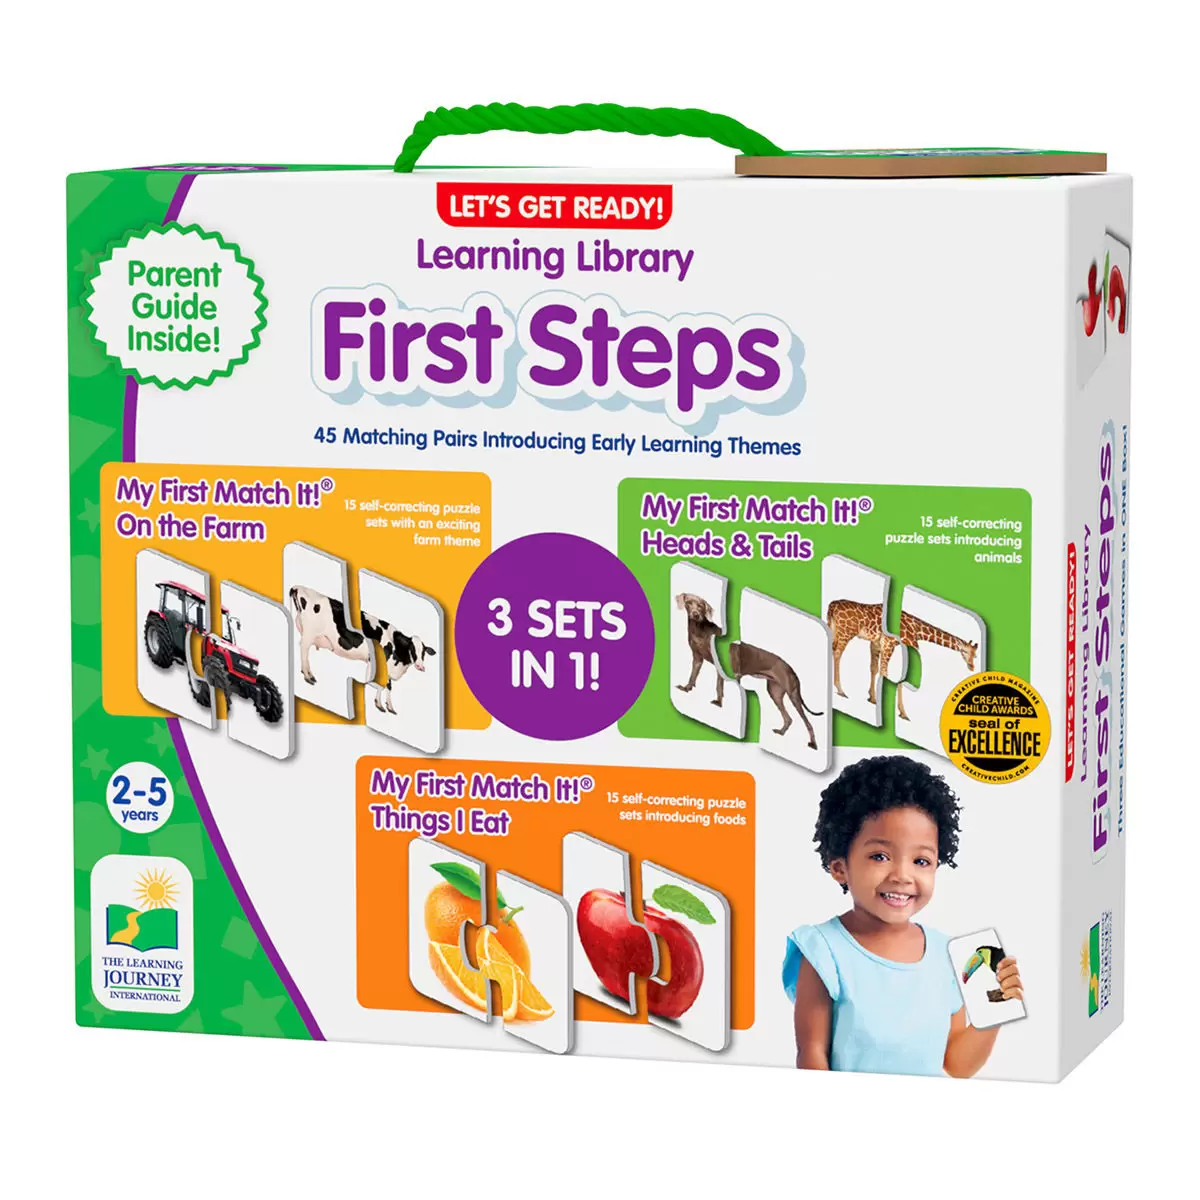 The Learning Journey 學習拼圖卡套組 First Steps